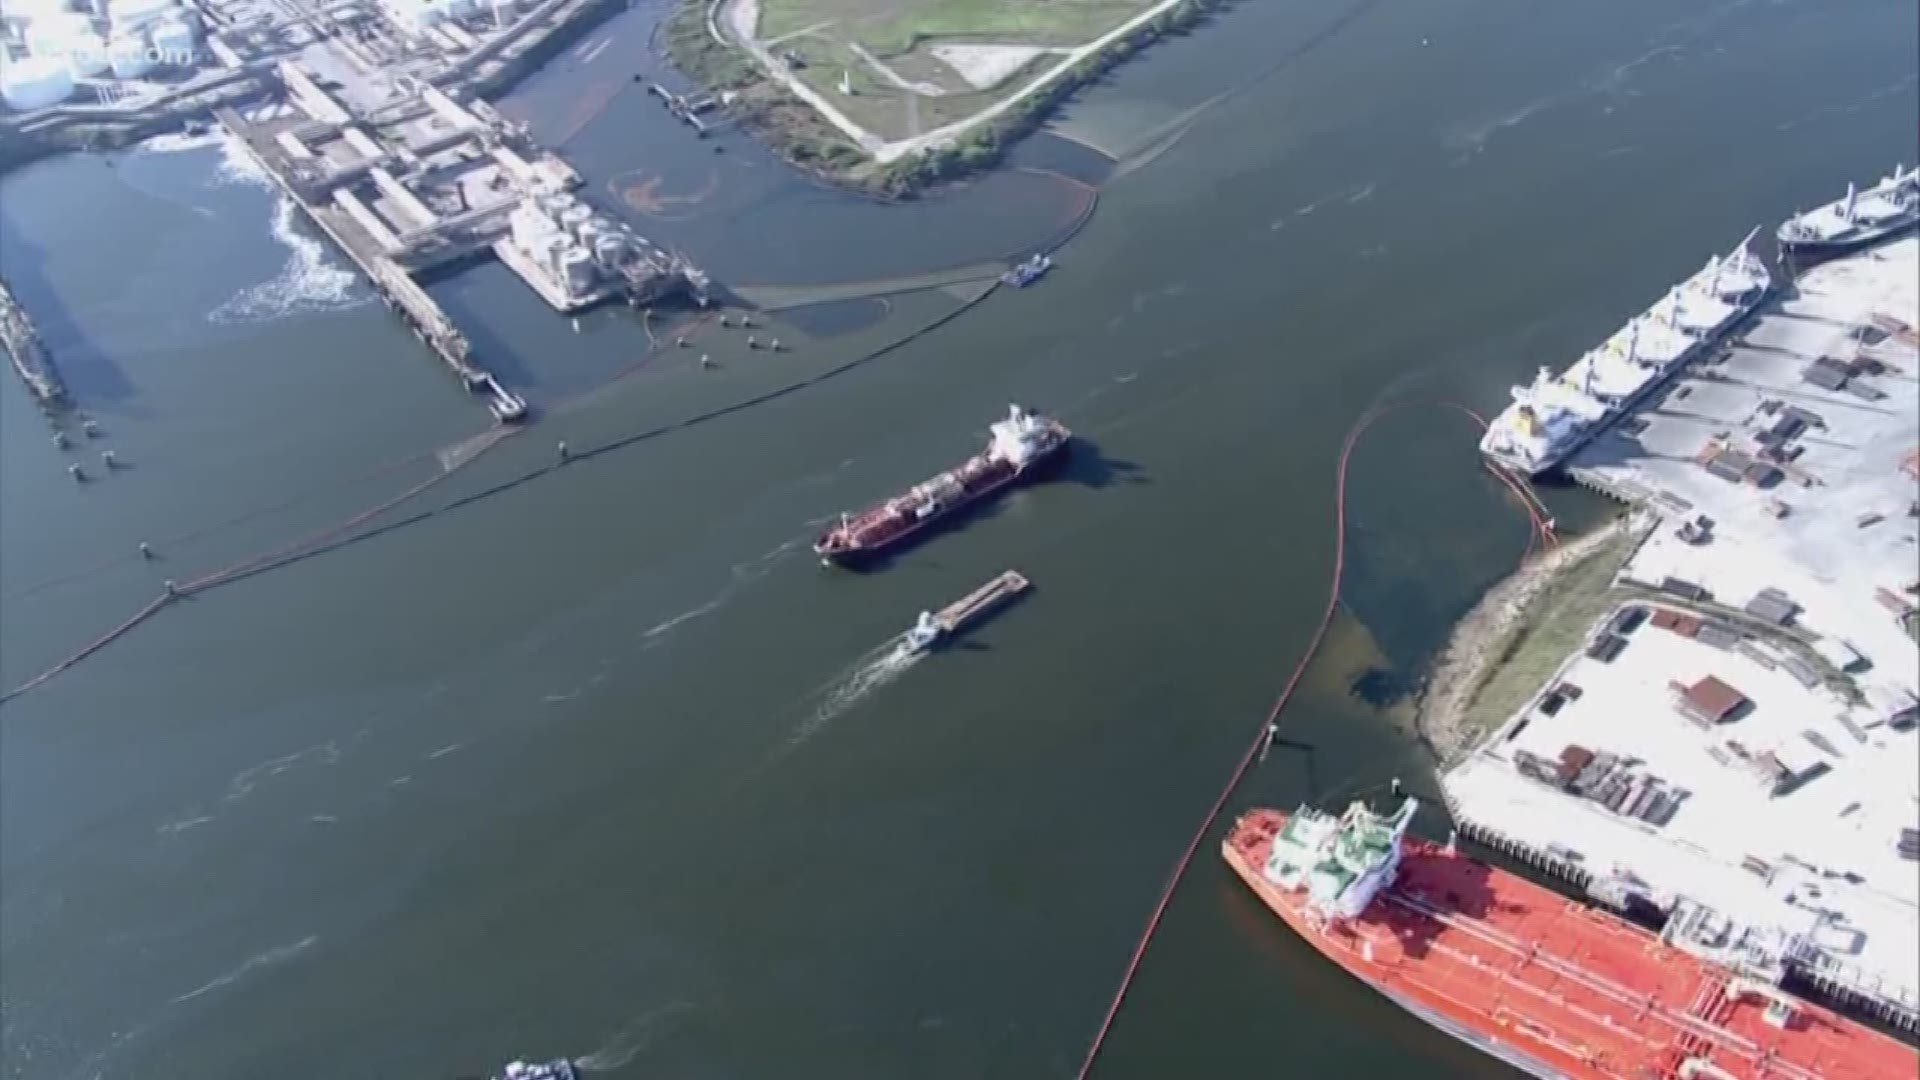 The Houston Ship Channel has reopened with some restrictions more than a week after being being partially shut down because of runoff from the ITC fire.